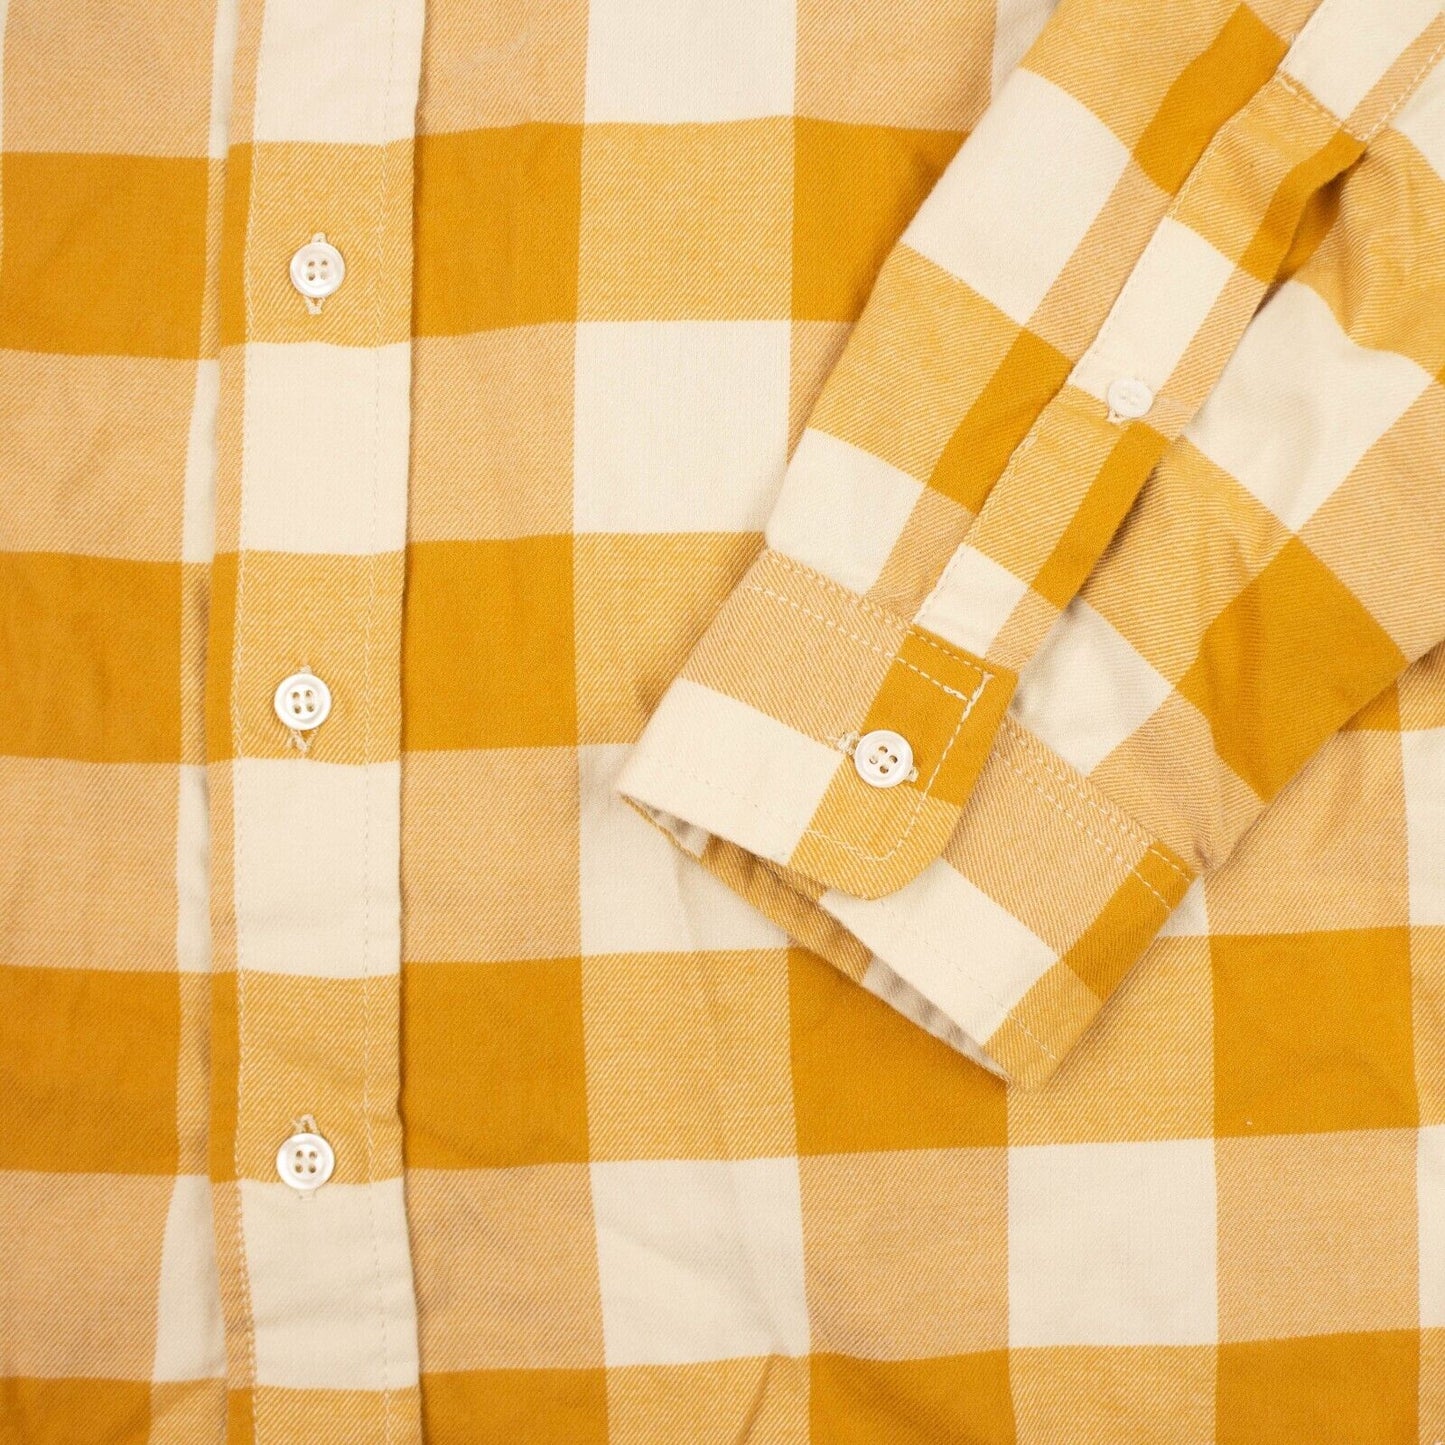 President'S Shirt Chatham Softflanella Check Washed - Curry